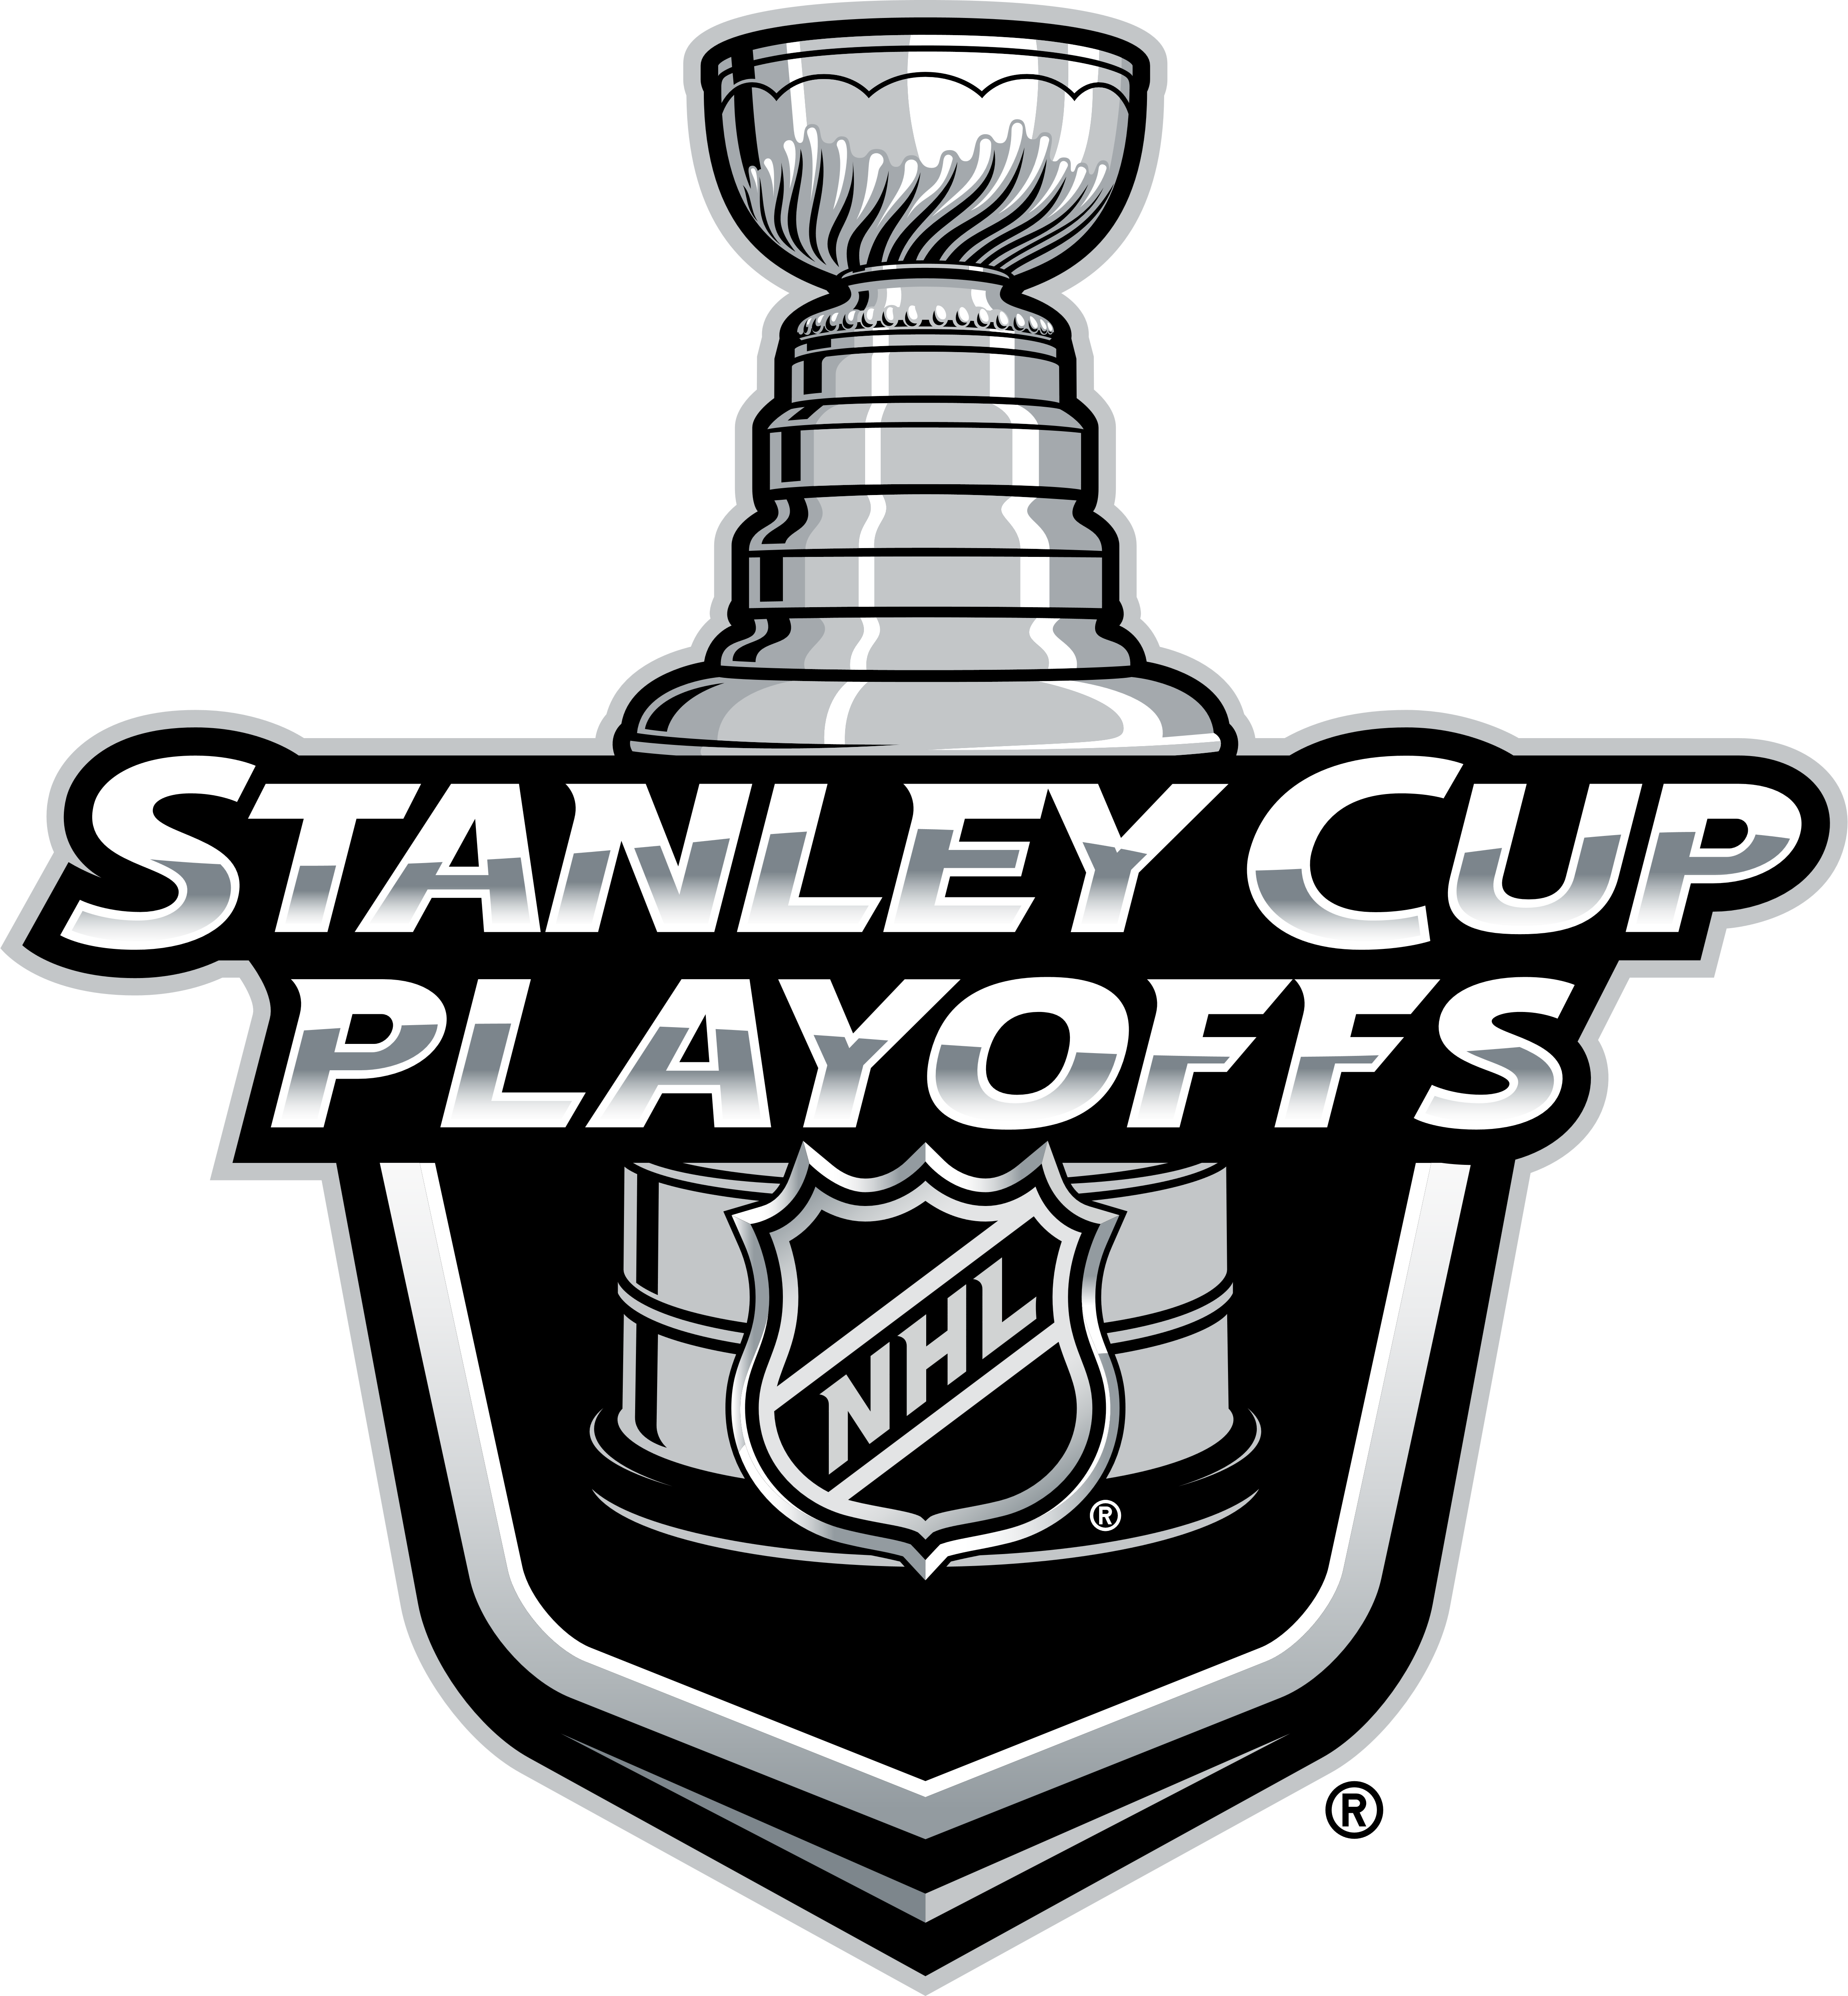 Stanley_Cup_Playoffs_logo.png